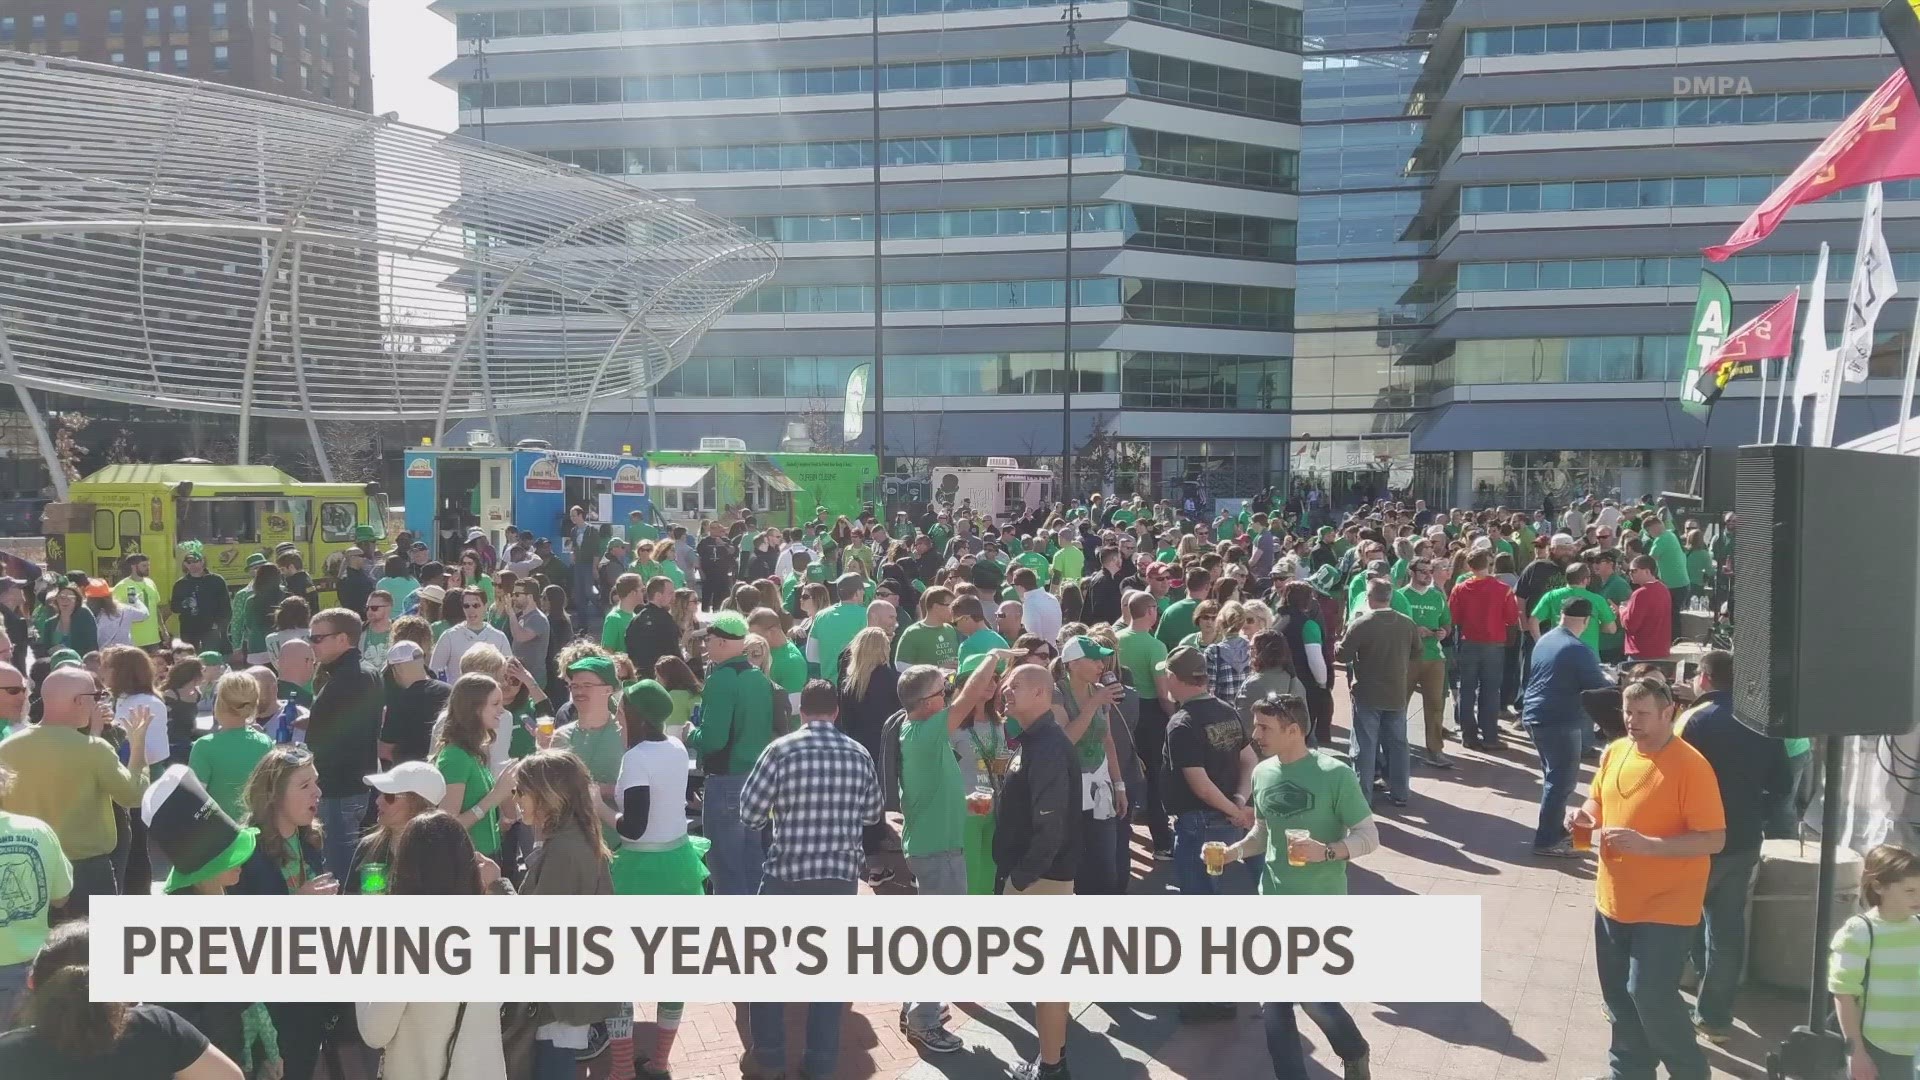 The March Madness watch party will take place at from 10 a.m. to 10 p.m. at Cowles Commons on March 16, 17 and 18.